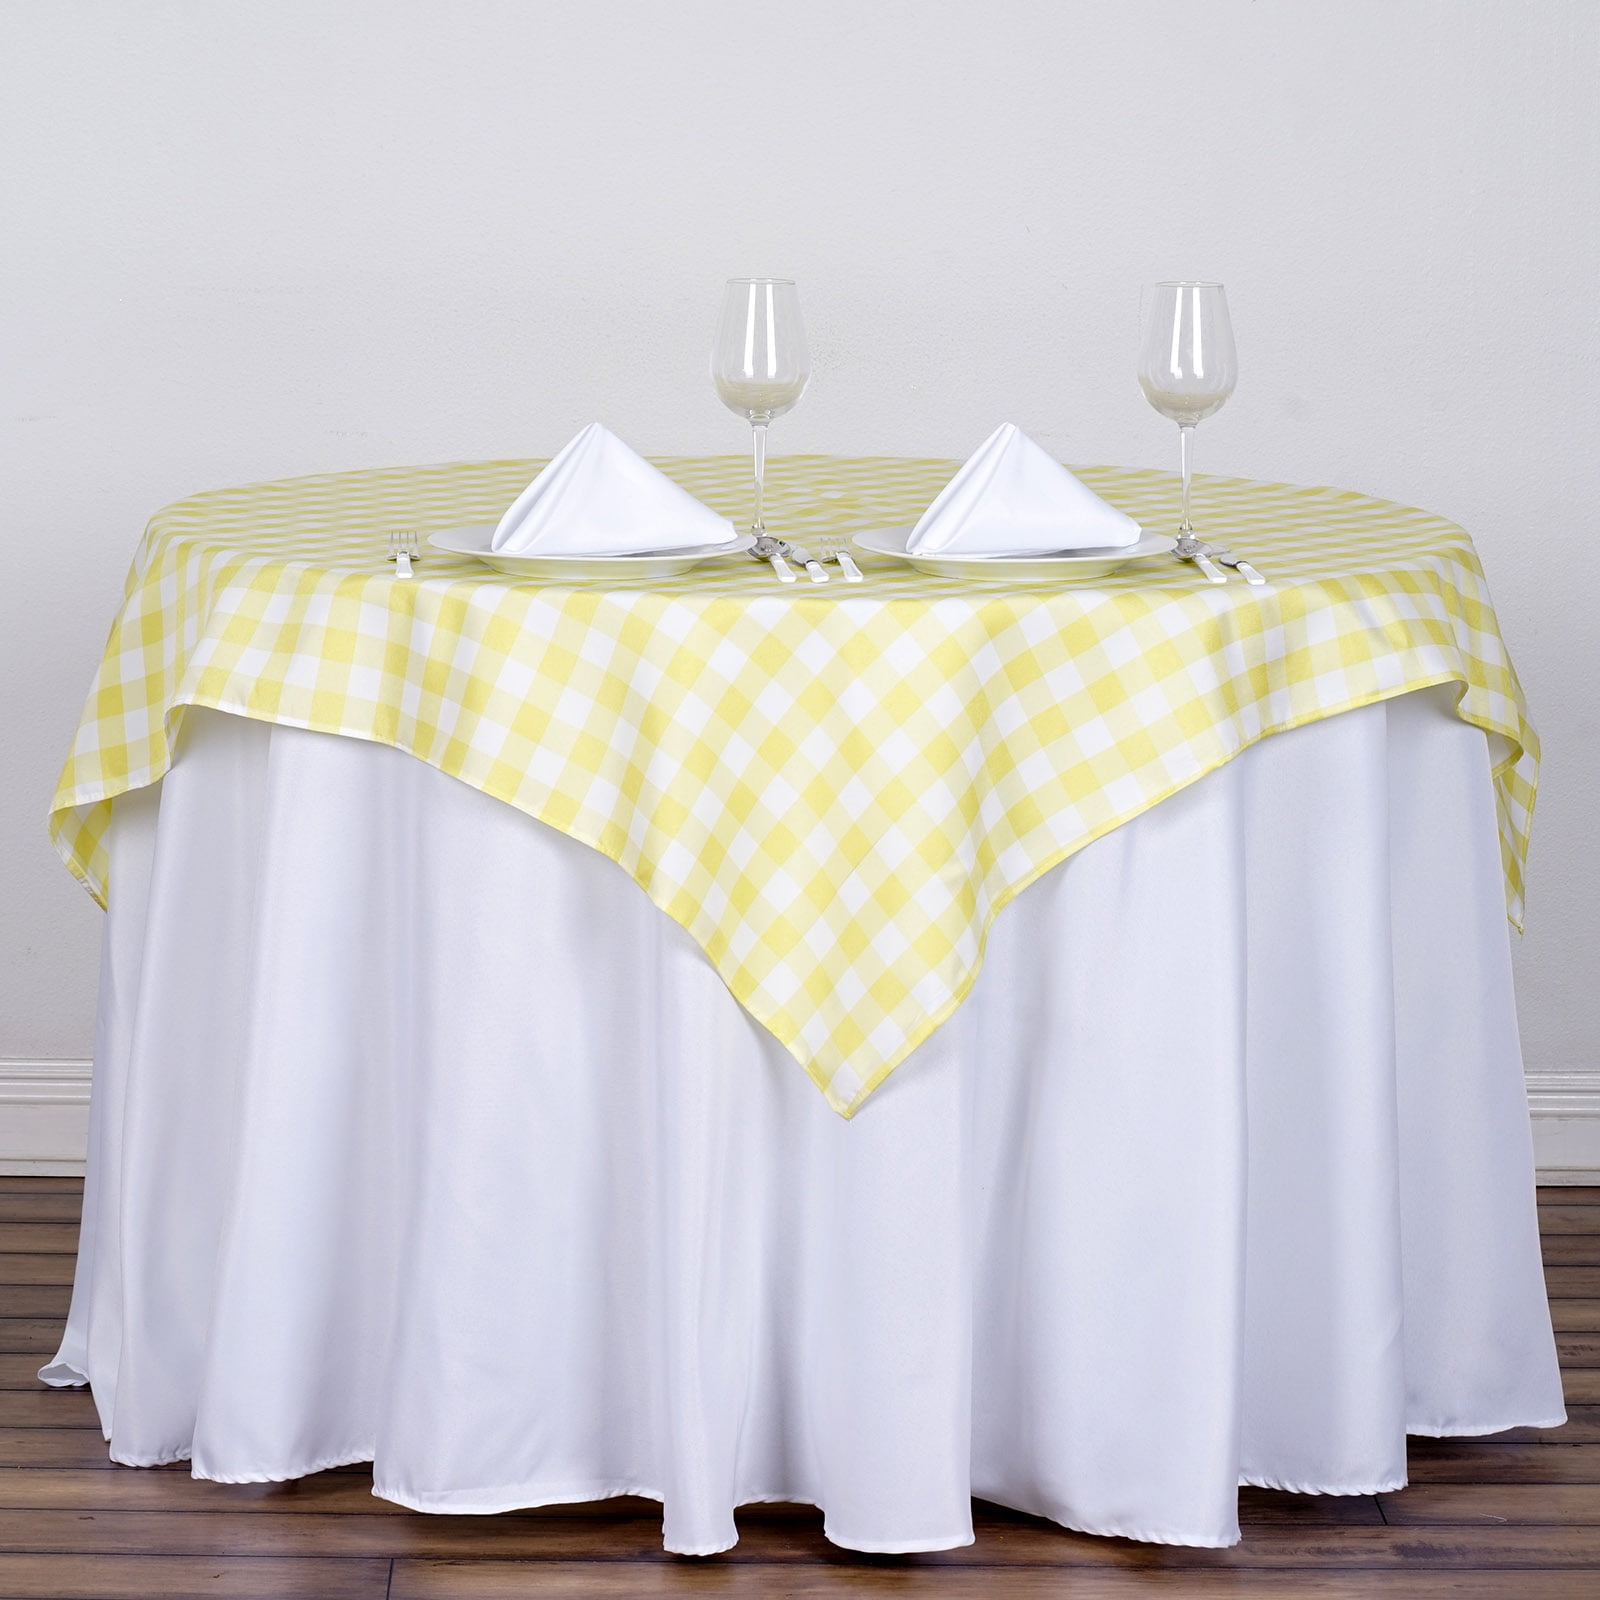 GINGHAM CHECK YELLOW WHITE SQUARE 54X54” 137X137CM TABLE CLOTH 